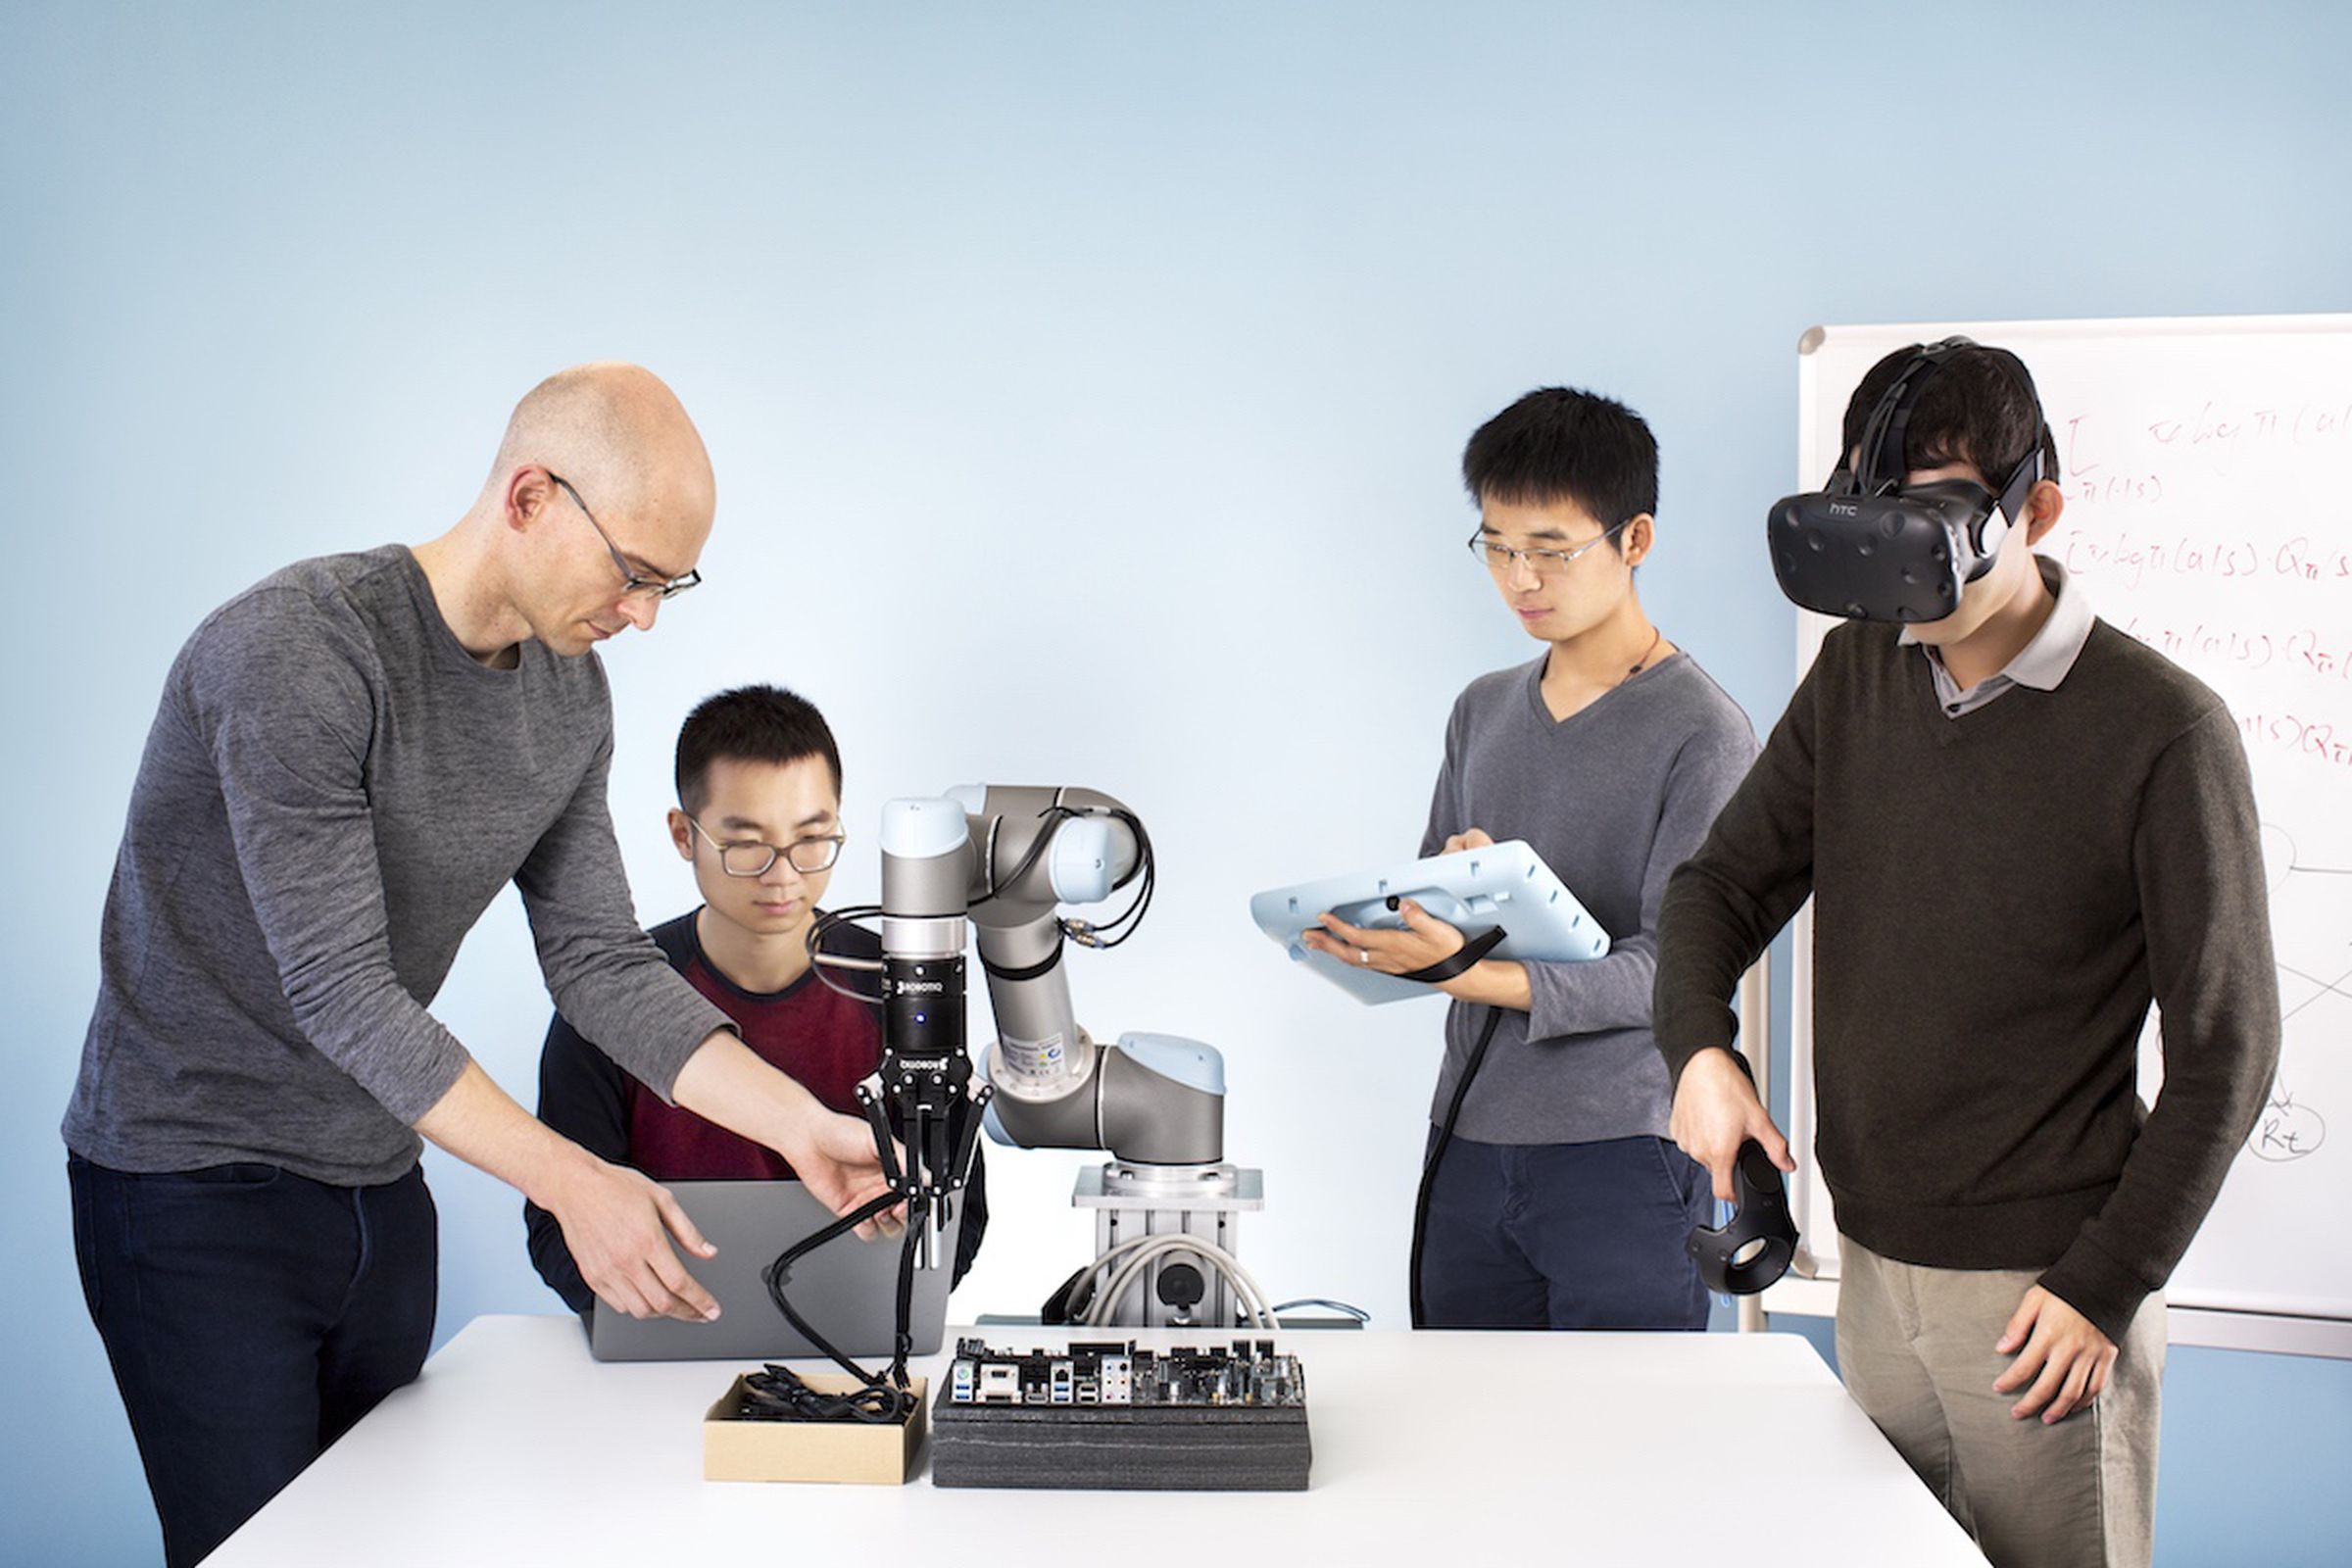 The Embodied Intelligence team, from left to right: Pieter Abbeel (president and chief scientist); Peter Chen (CEO); Rocky Duan, (CTO); and Tianhao Zhang (research scientist).